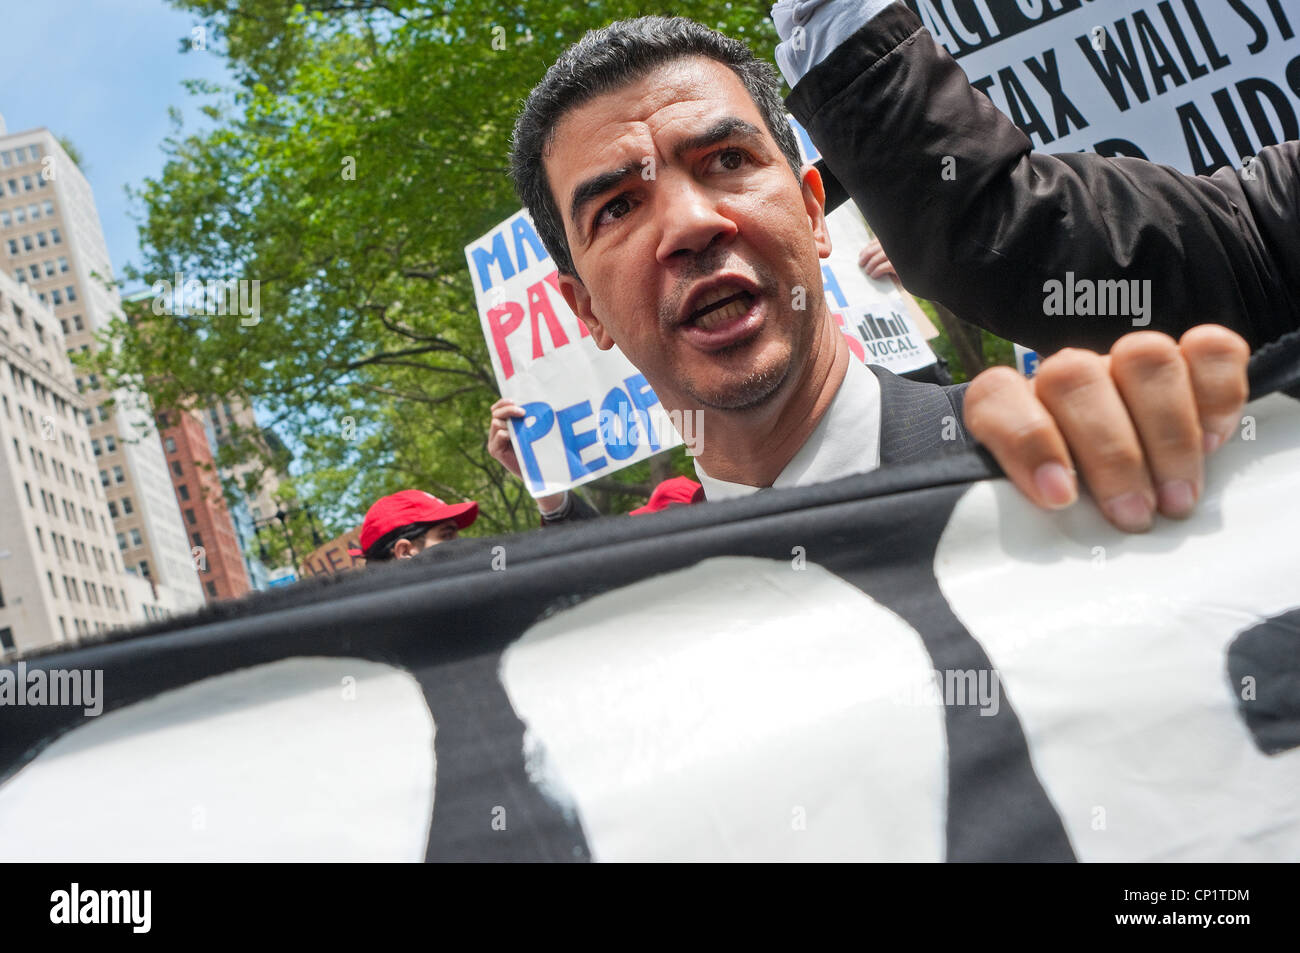 Consigliere Comunale Ydanis Rodriguez si unisce Act-Up e occupare Wall Street in marzo a Wall Street Foto Stock